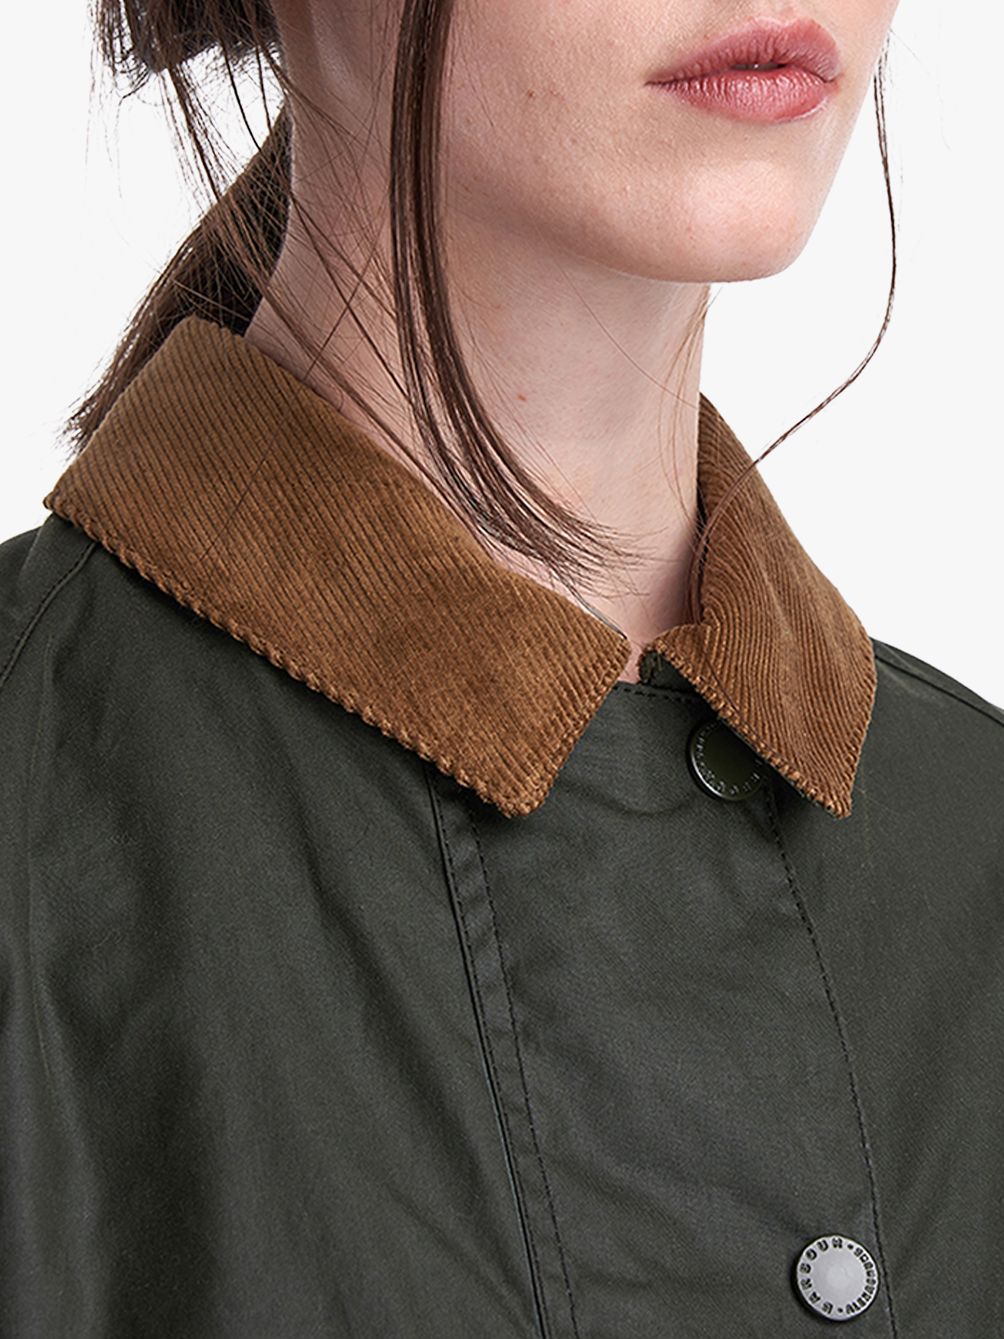 barbour edith waxed cotton jacket